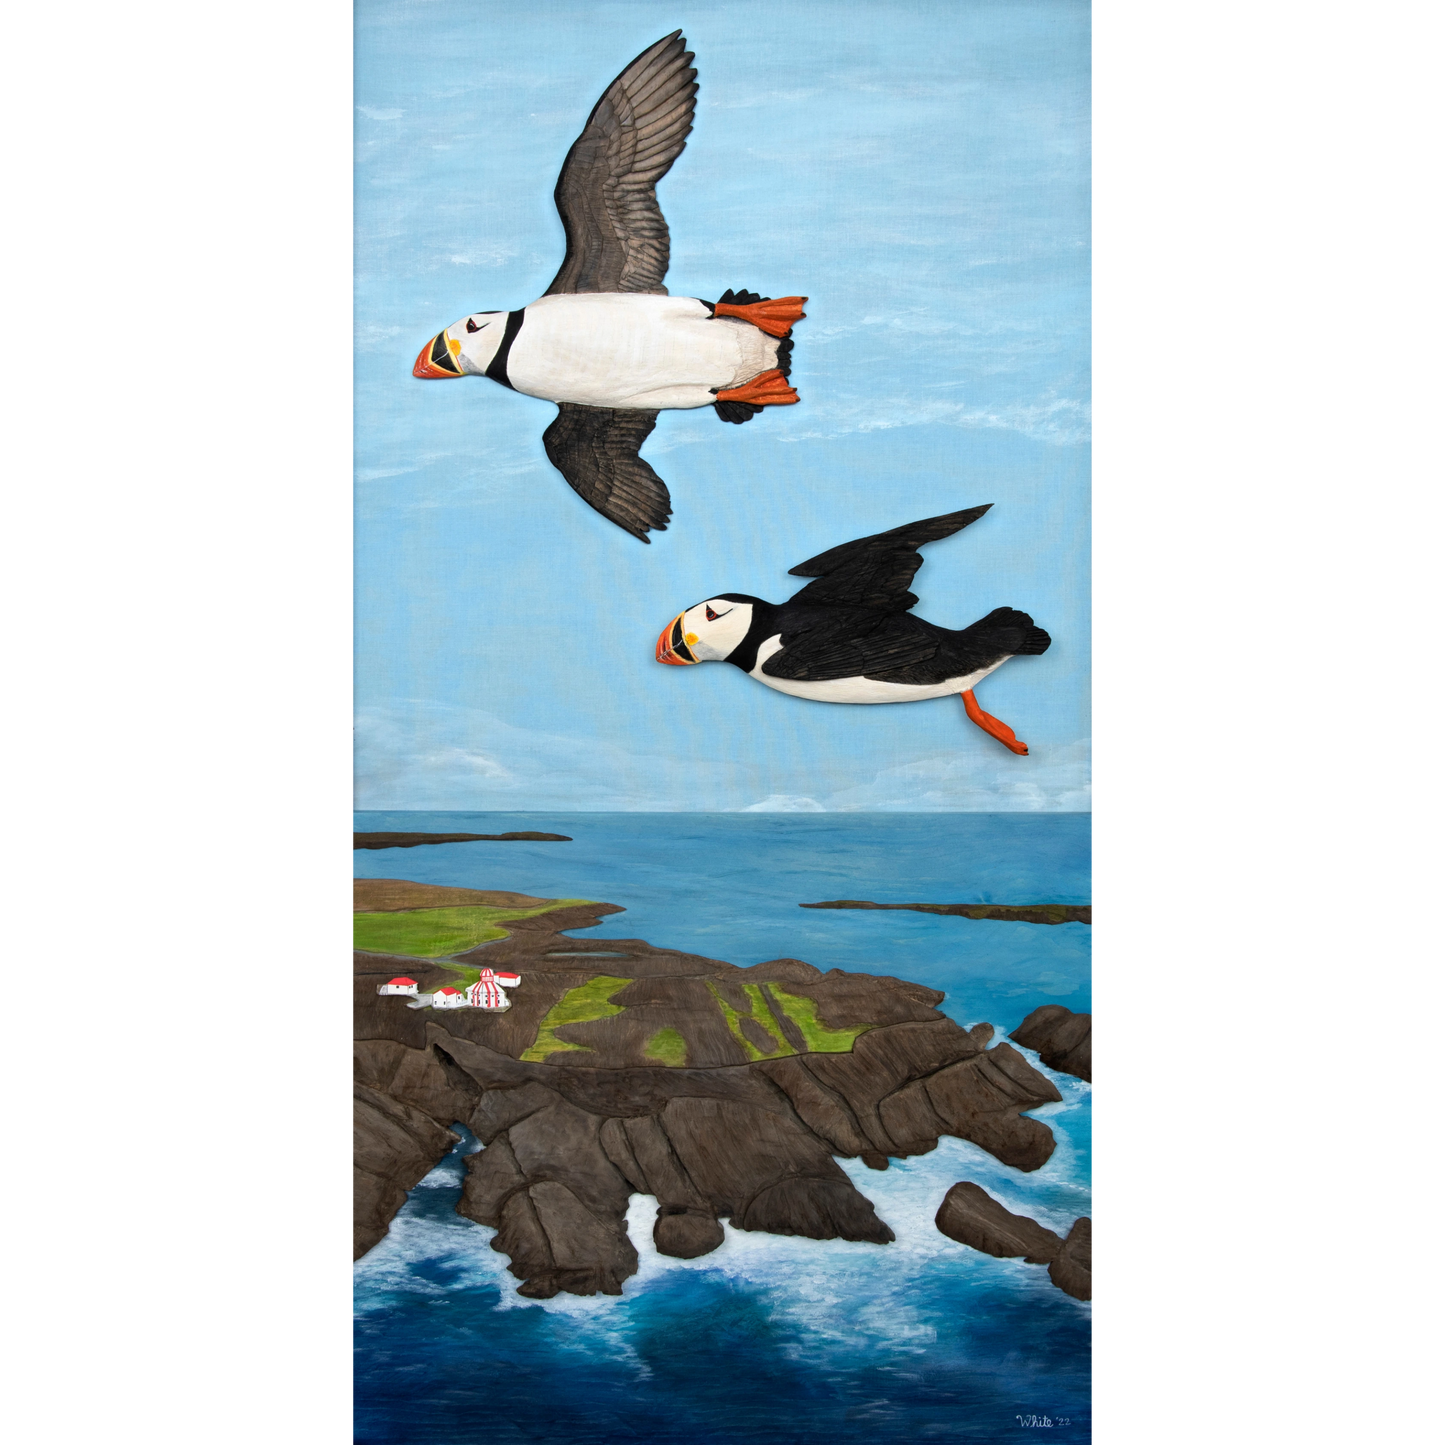  "Over the Cape" reproduction print showcases two puffins flying over the rugged Newfoundland coast.